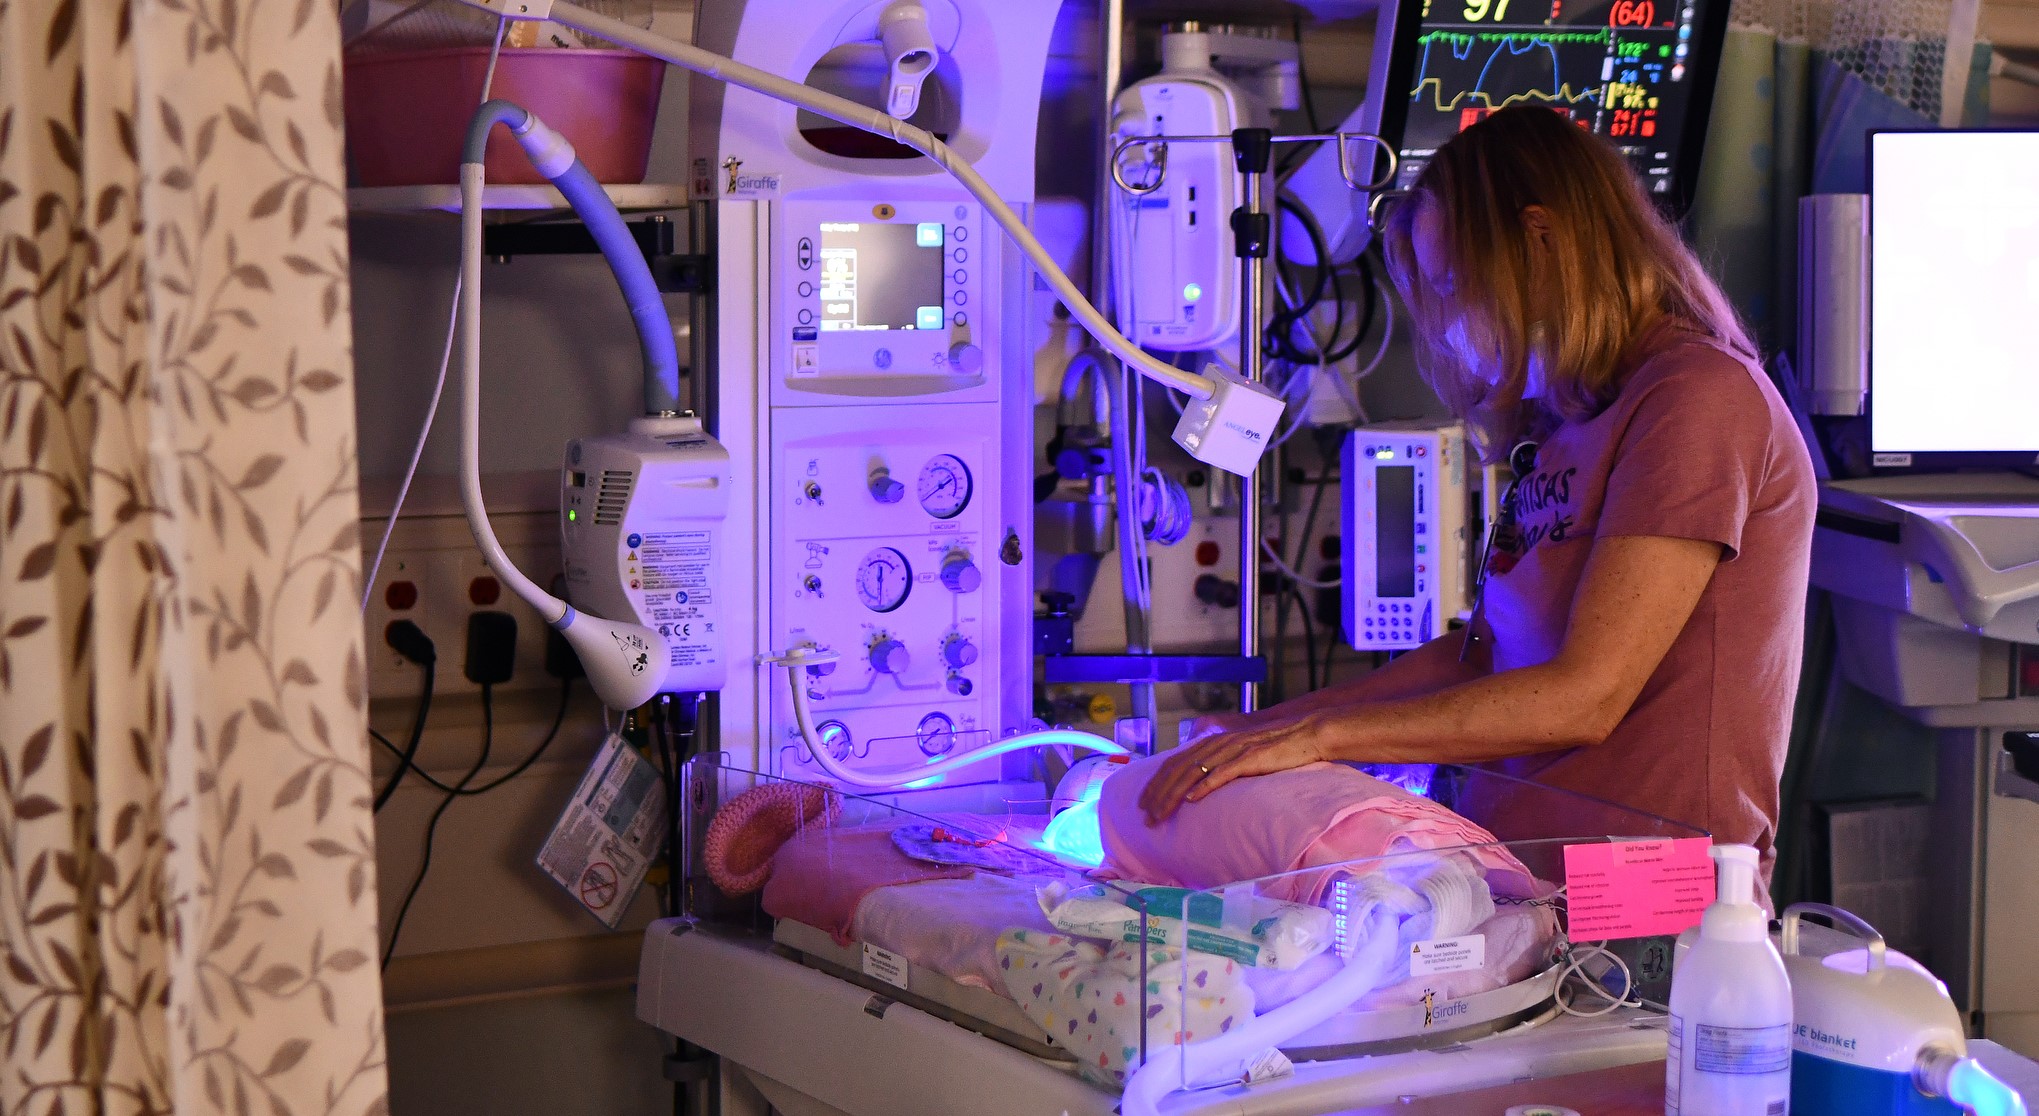 Spartanburg Regional&rsquo;s NICU Support Program goes step-by-step with new parents